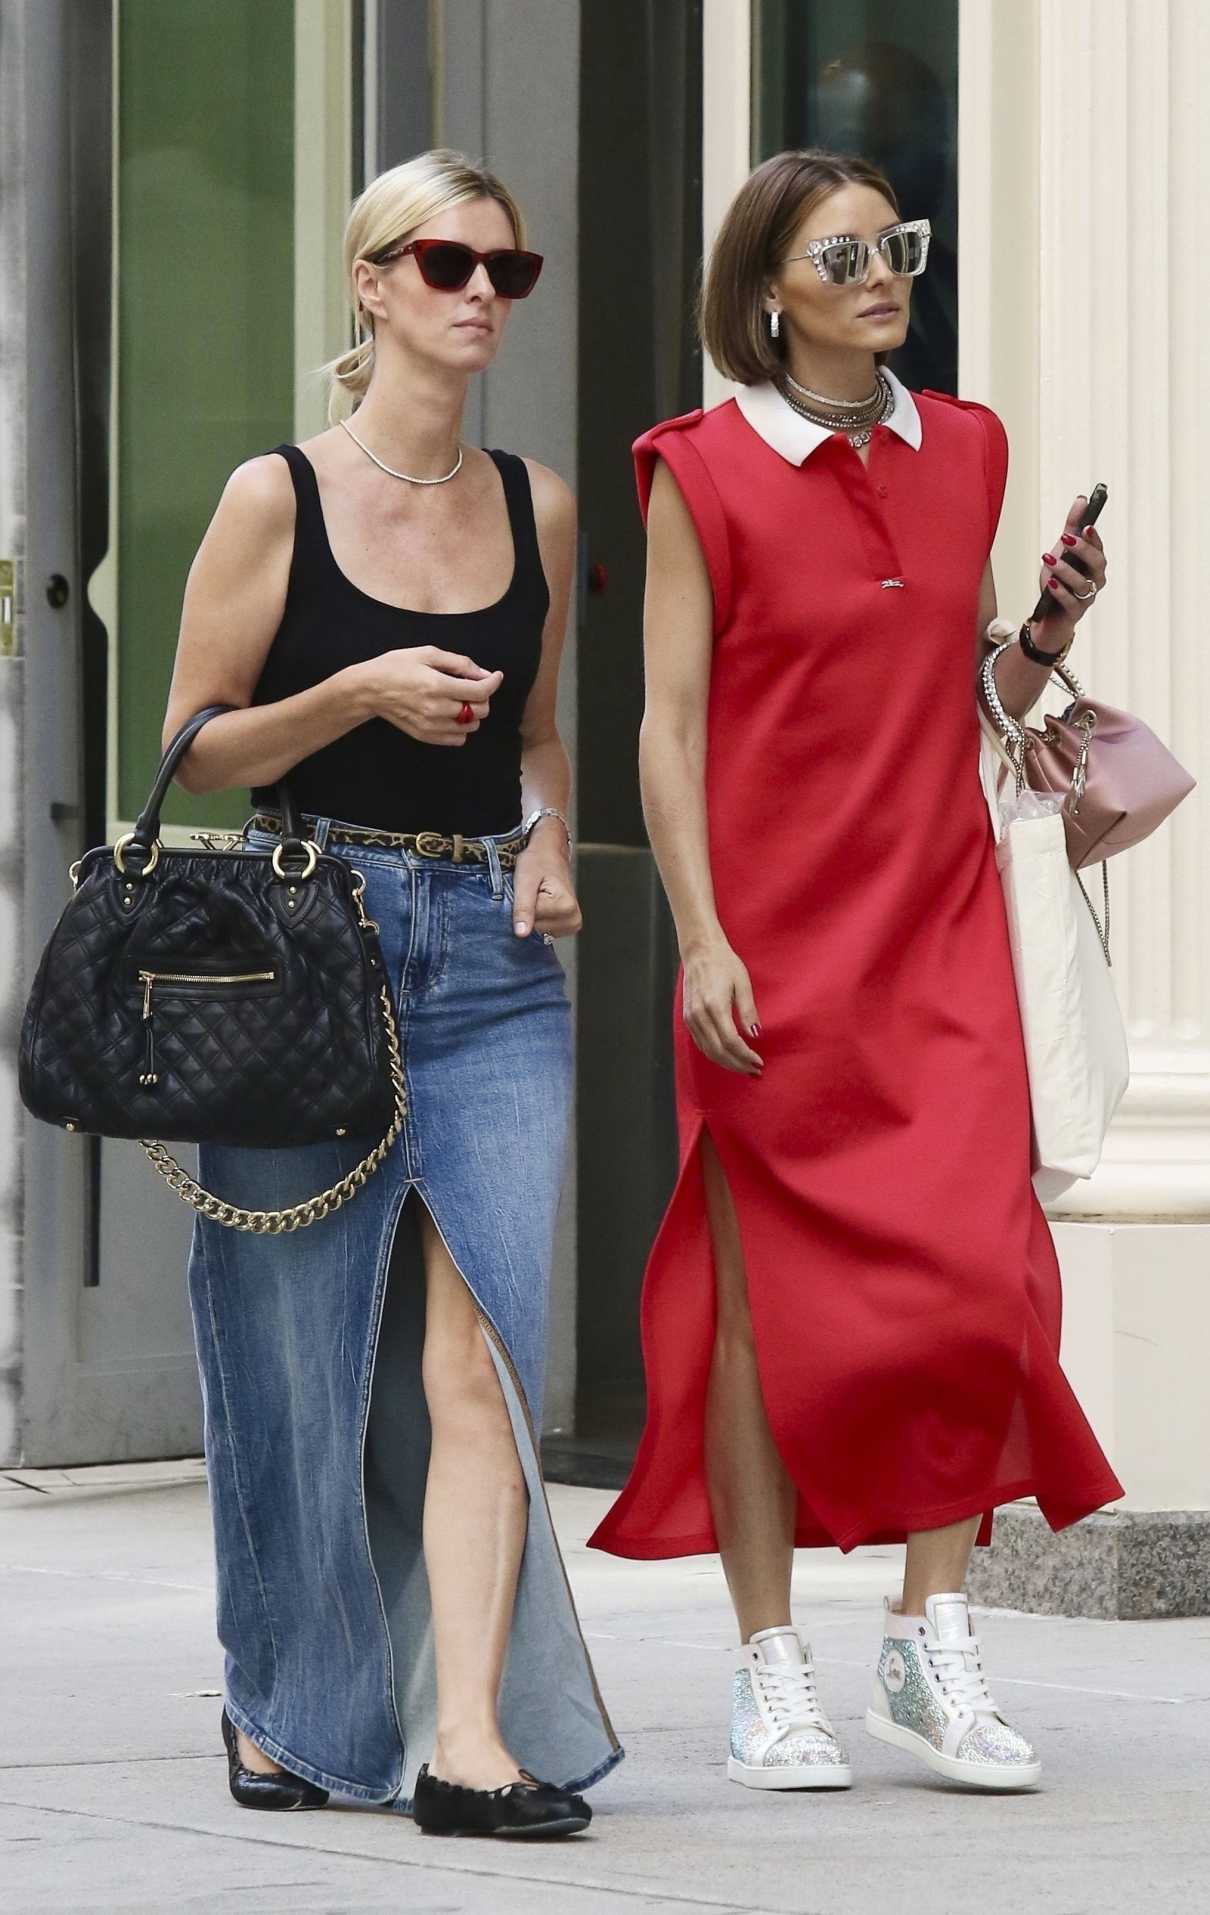 Olivia Palermo in a Red Dress